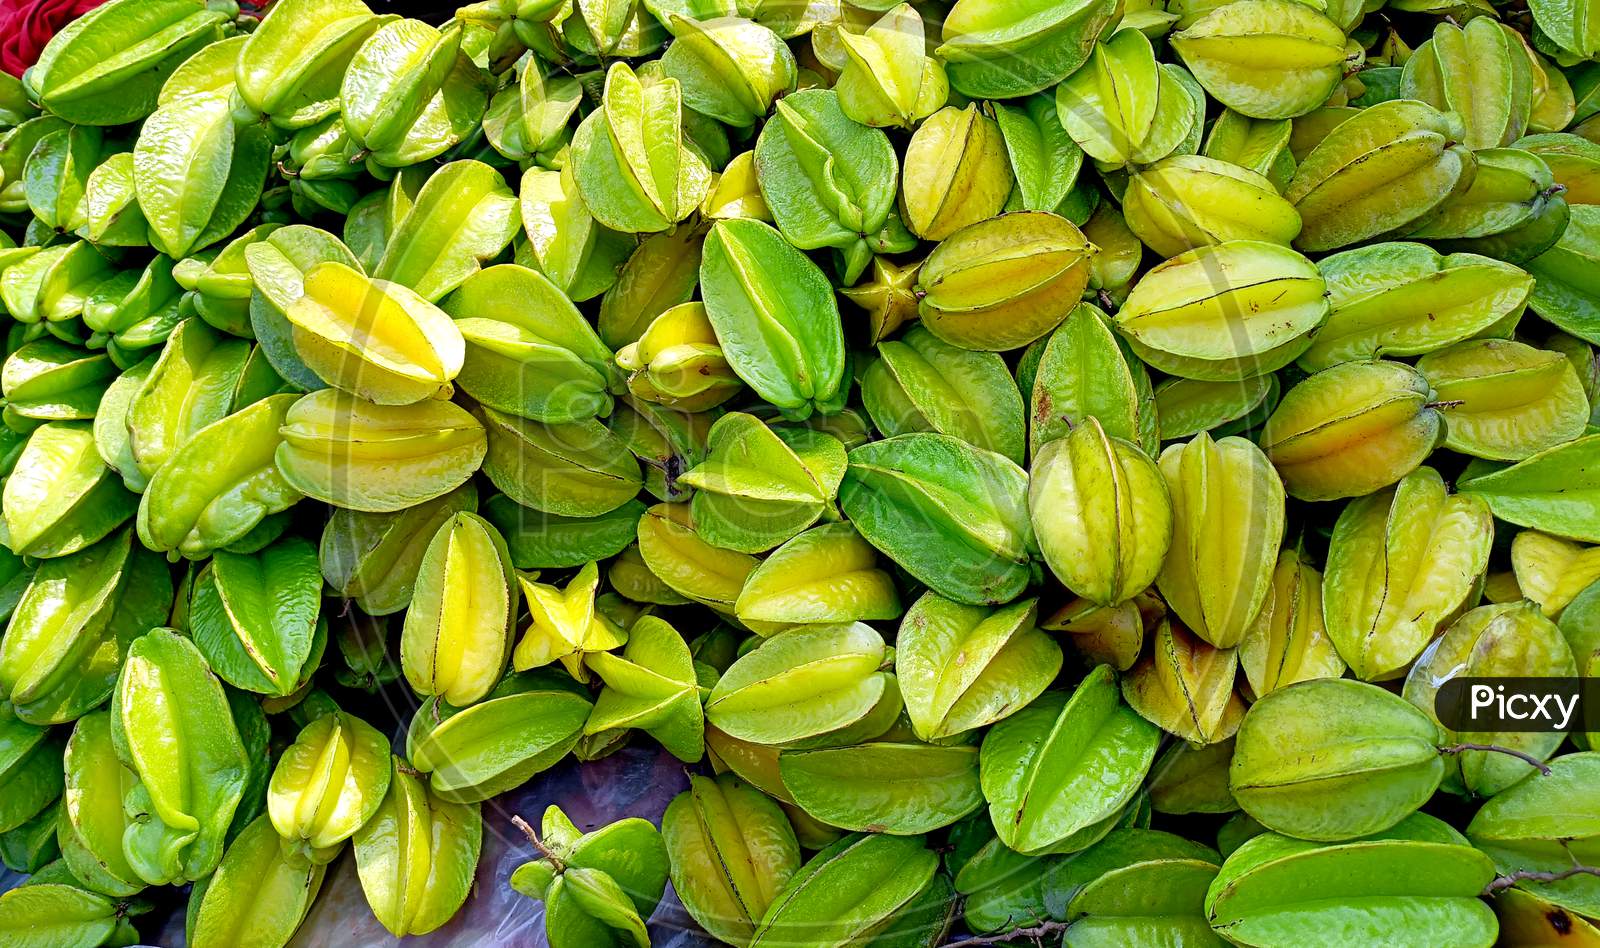 Bunch Of Star Fruit Or Carambola To Sell In Local Market. Green And Yellow Color Give The Unique Deliciousness Of This Rare Tropical Fruit